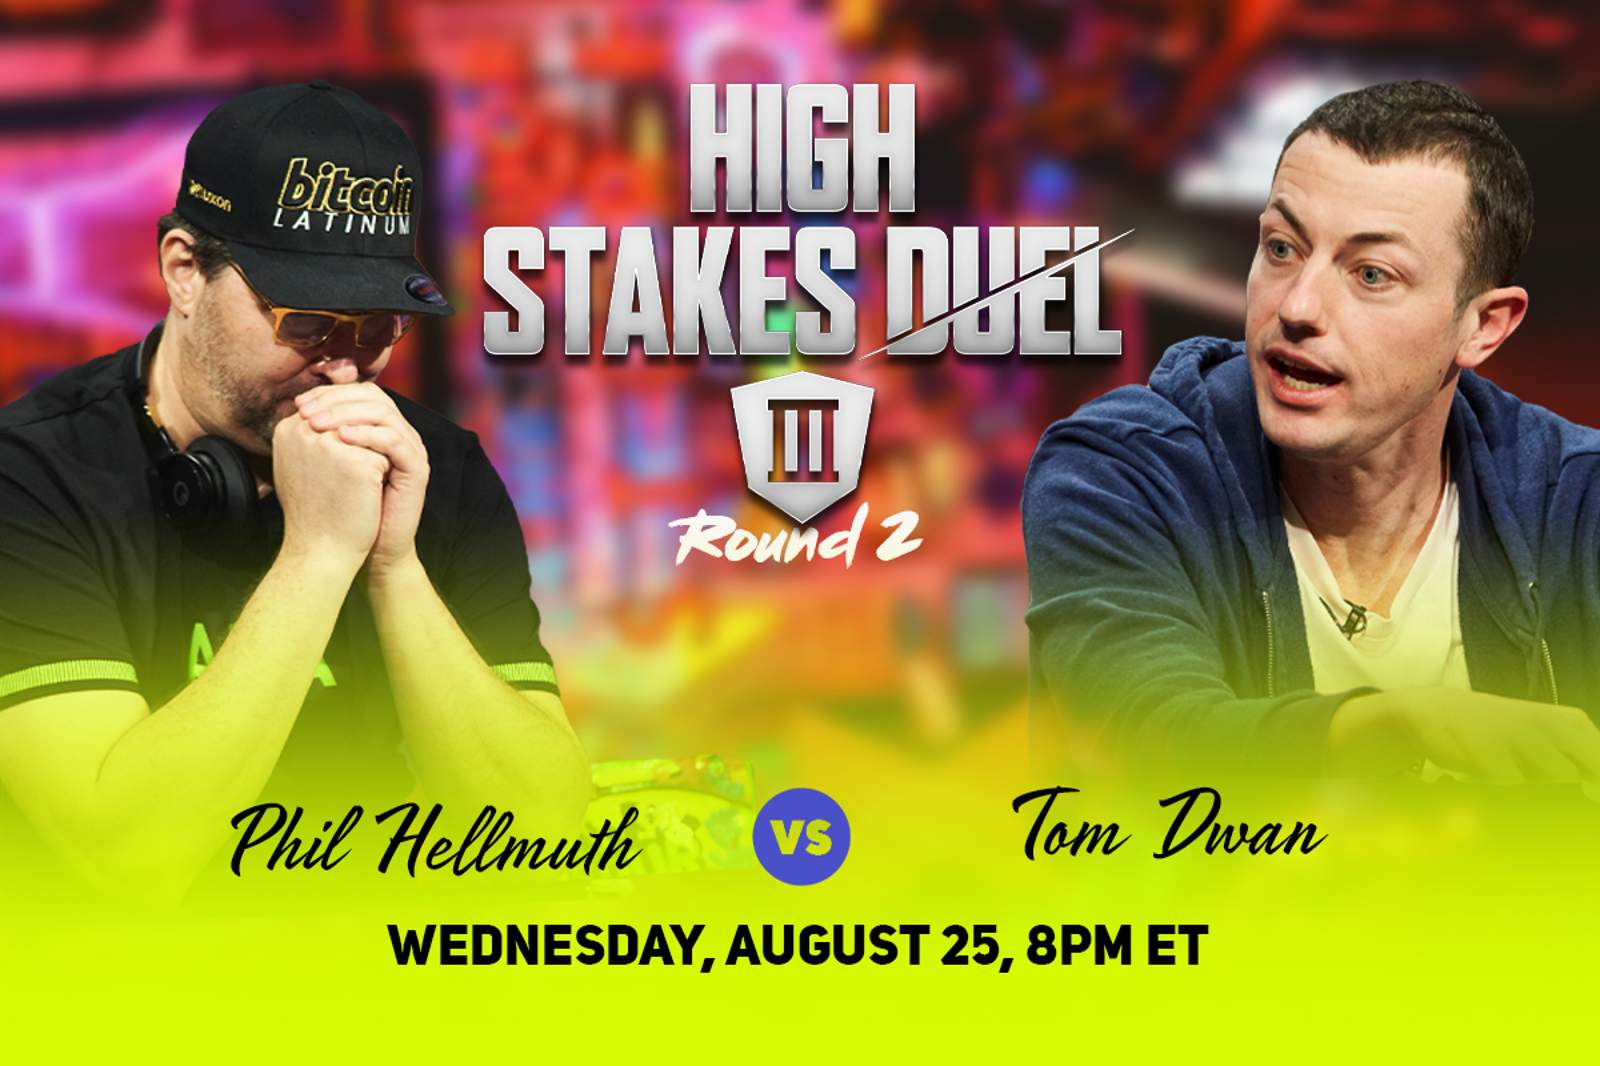 Phil Hellmuth To Face Tom Dwan for $200,000 In High Stakes Duel III